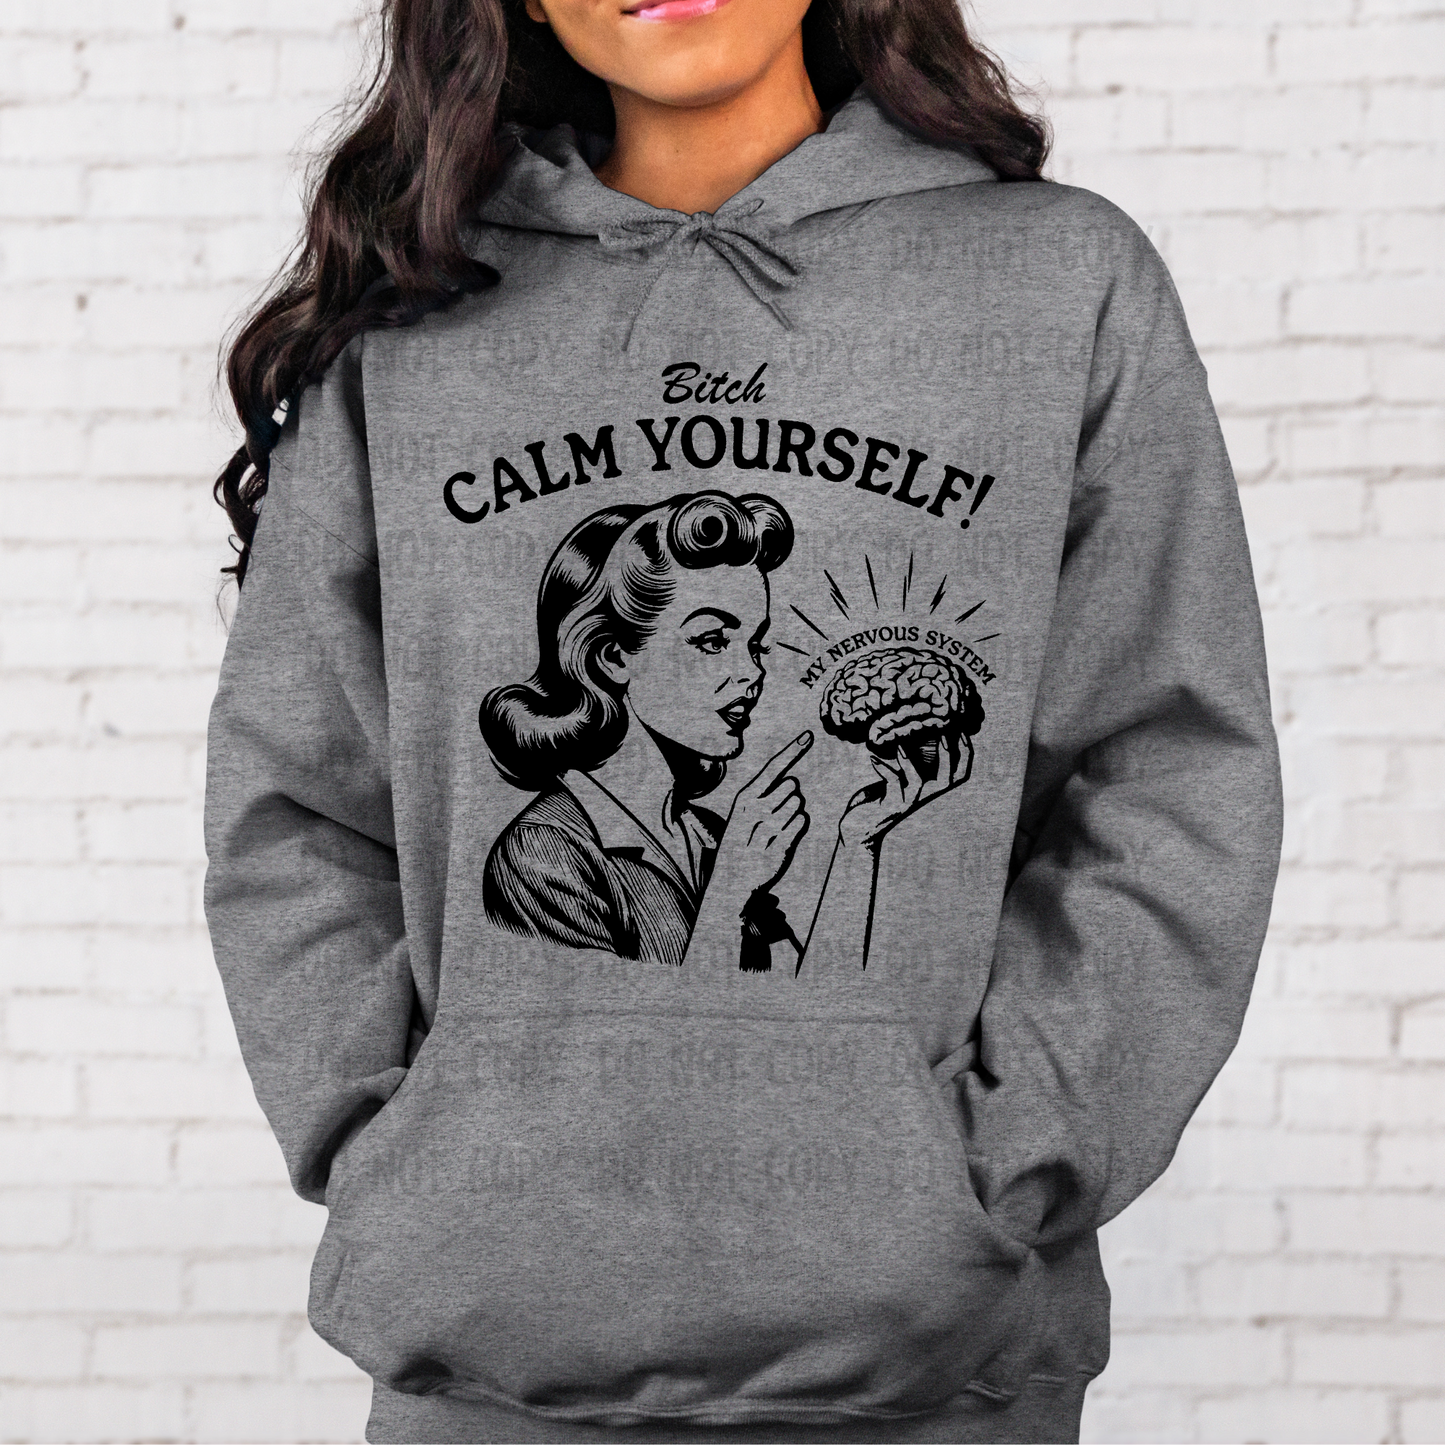 Calm yourself - Sublimation